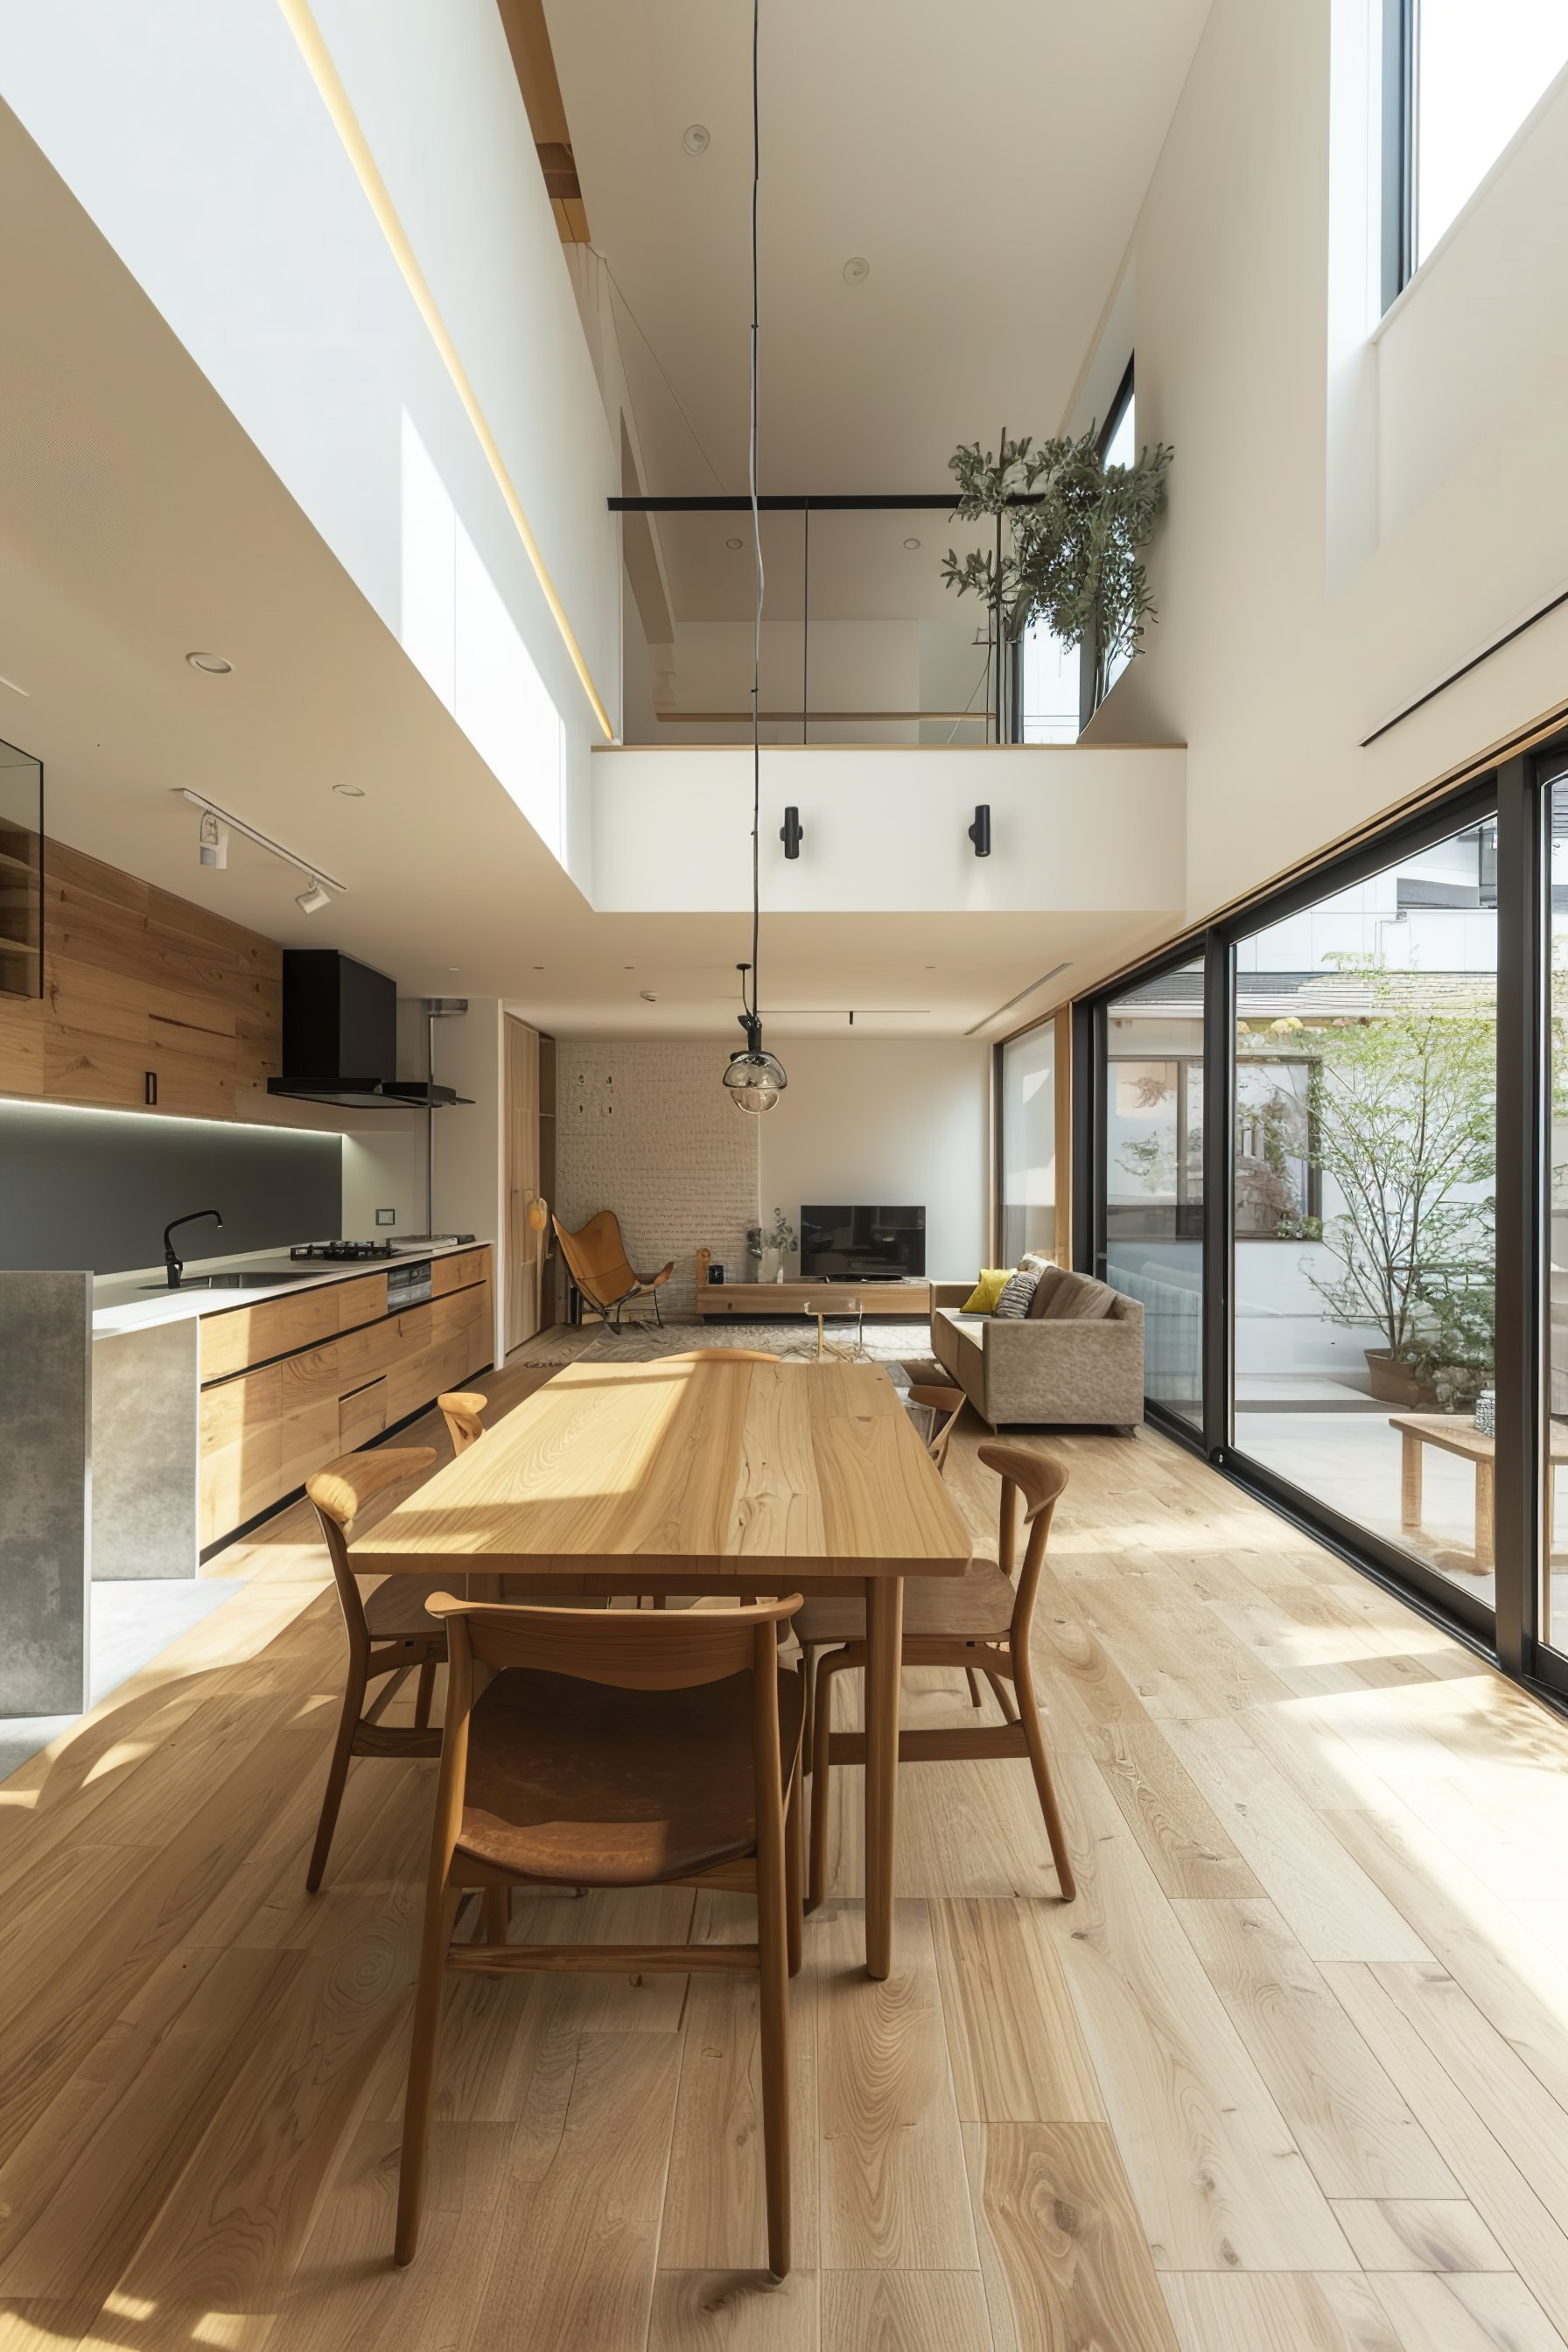 Modern interior with wooden dining table, chairs, open-plan kitchen, and living area, leading to garden through glass doors.